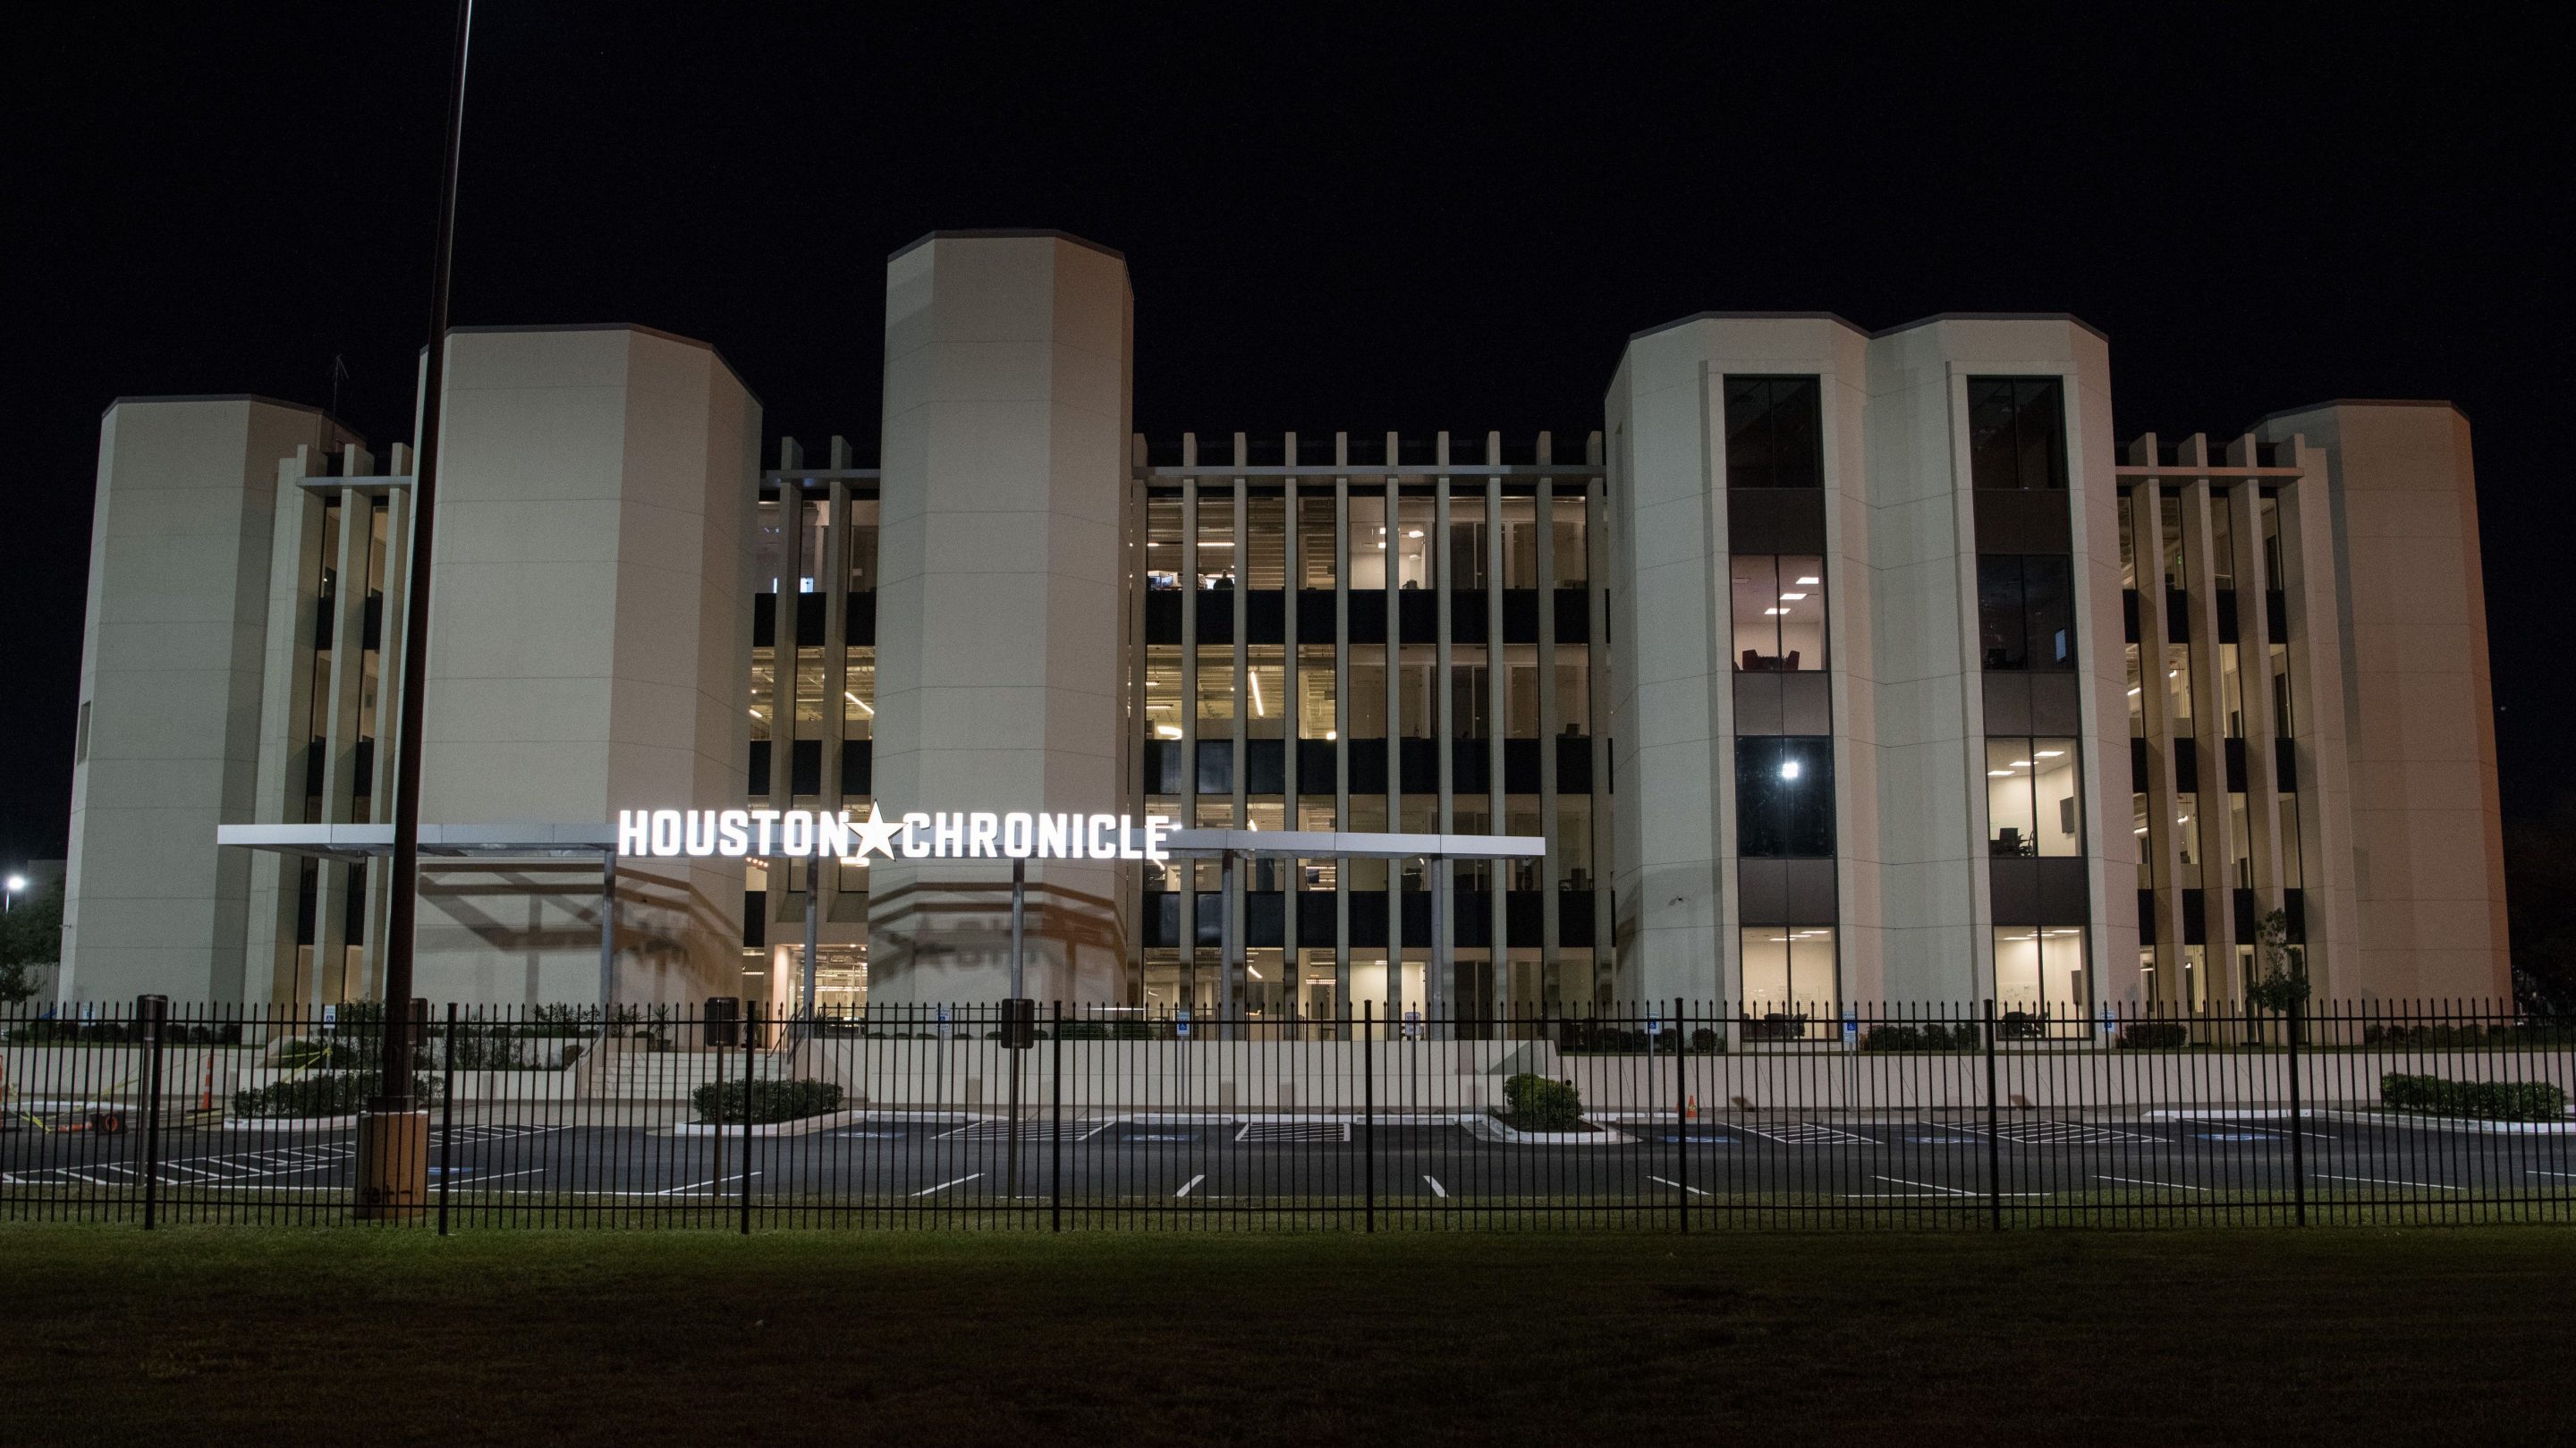 The front of the Houston Chronicle building at night